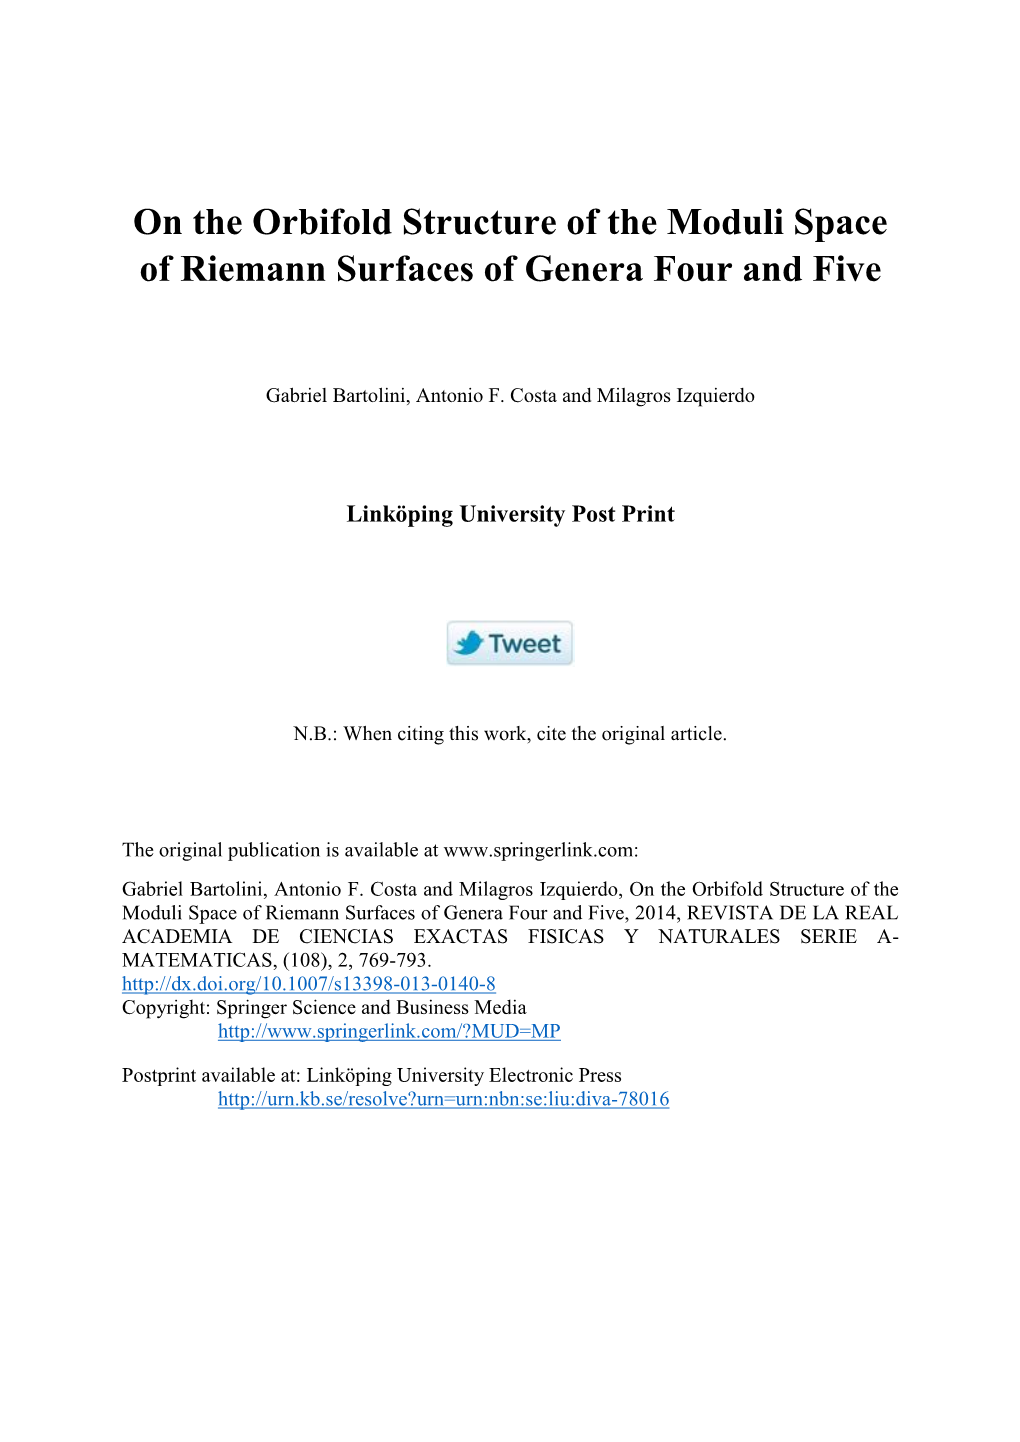 On the Orbifold Structure of the Moduli Space of Riemann Surfaces of Genera Four and Five